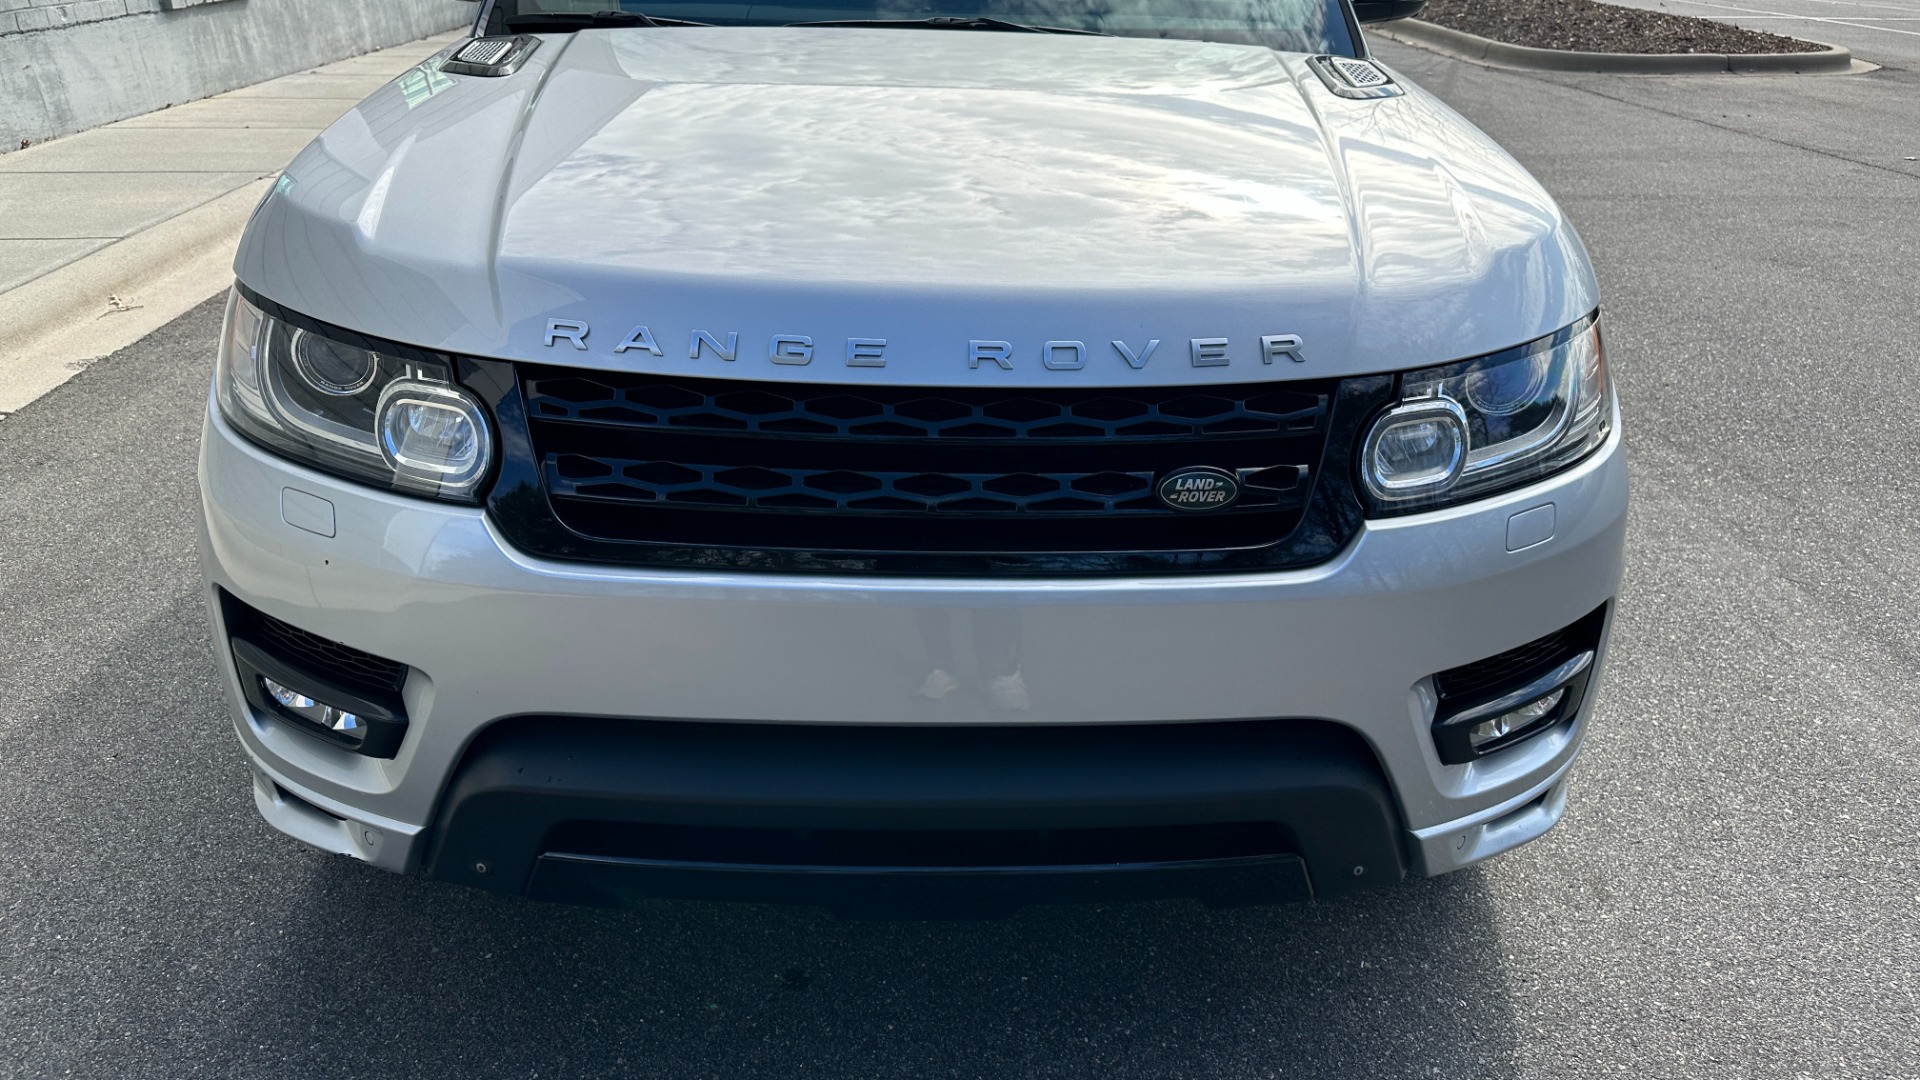 Used 2014 Land Rover Range Rover Sport Autobiography for sale $36,999 at Formula Imports in Charlotte NC 28227 6